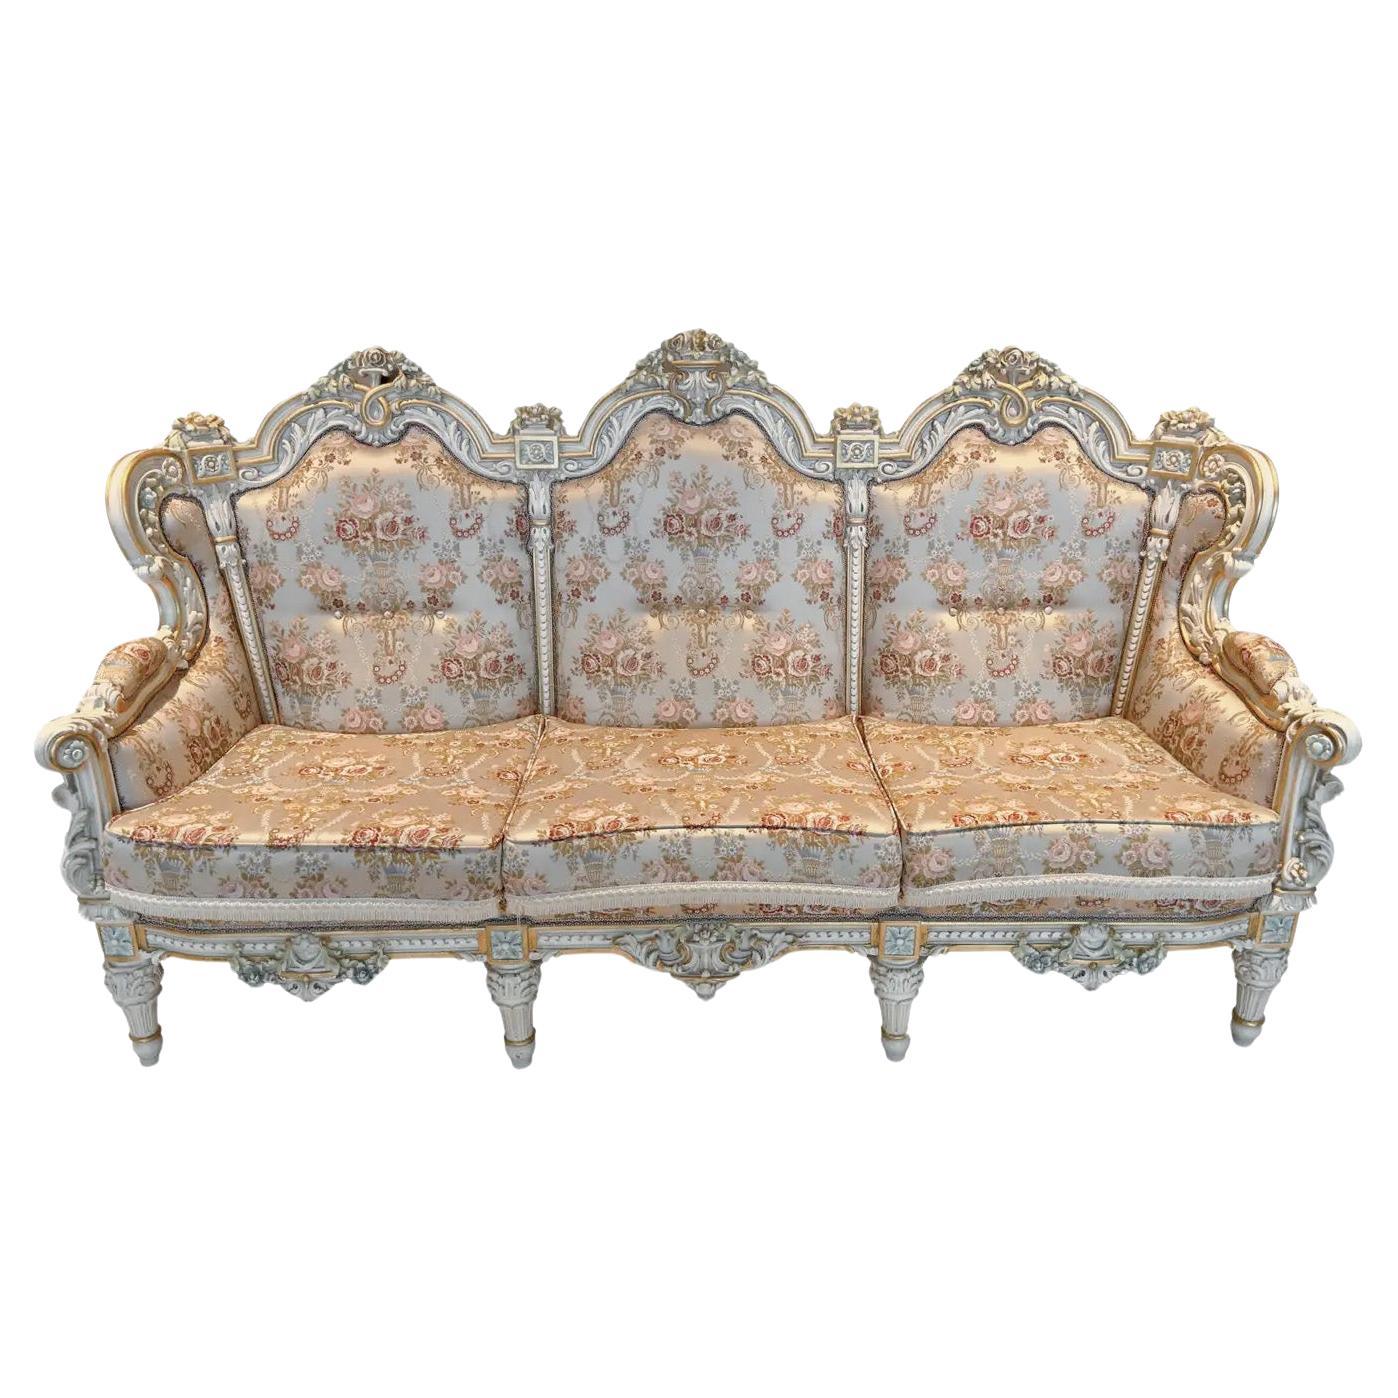 Italian Neoclassical Baroque Style Sofa with fine floral silk upholstery  For Sale